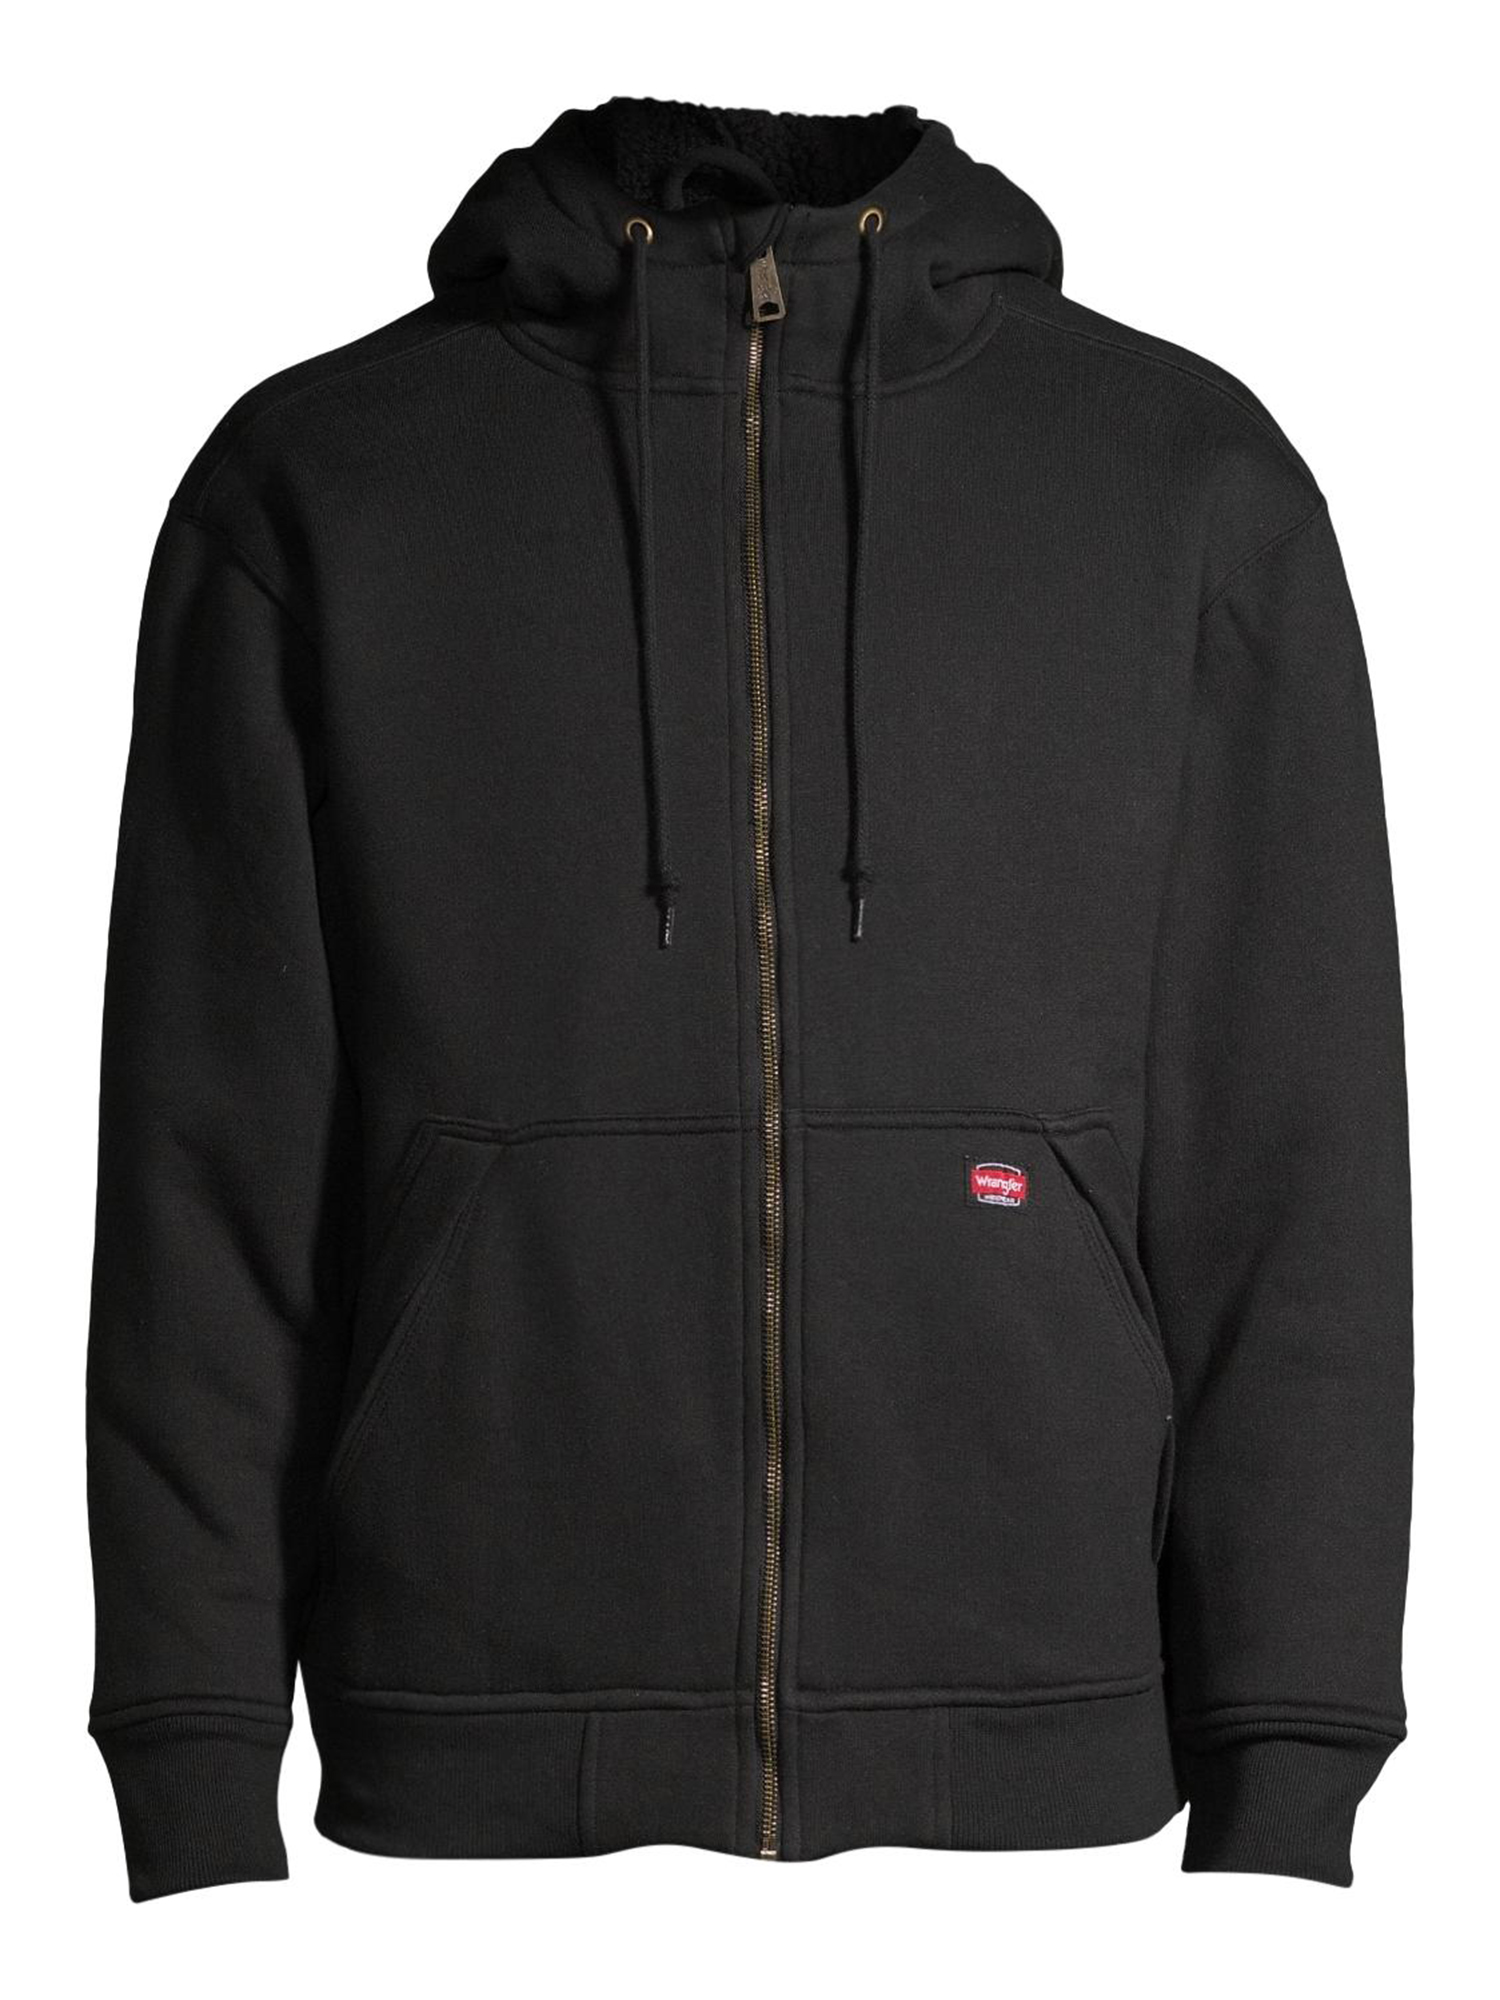 Wrangler Workwear Men's Guardian Heavy Weight Faux Sherpa and Quilt Lined Hoodie - image 5 of 5